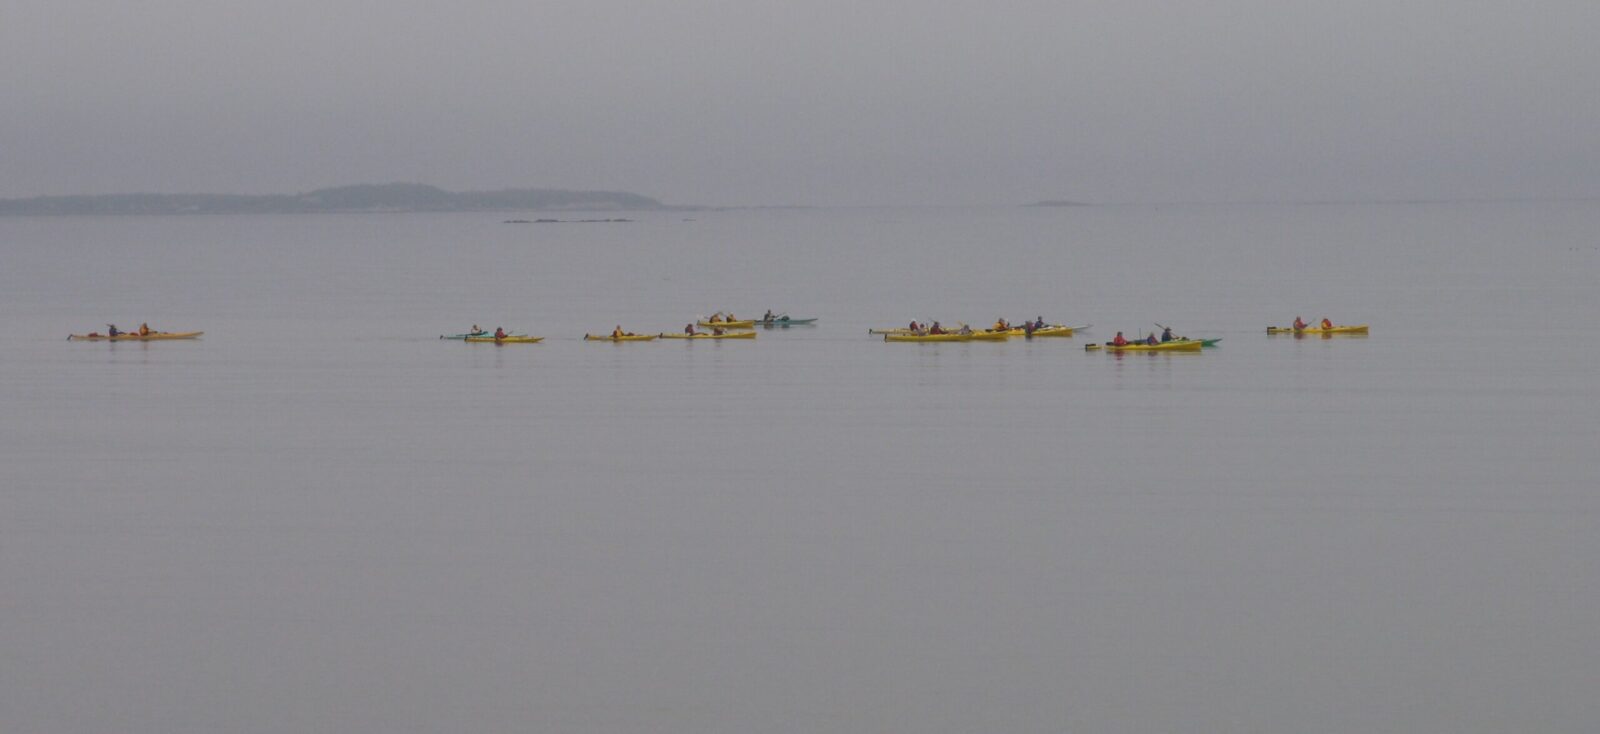 A group of yellow kayaks in the water on a foggy day.